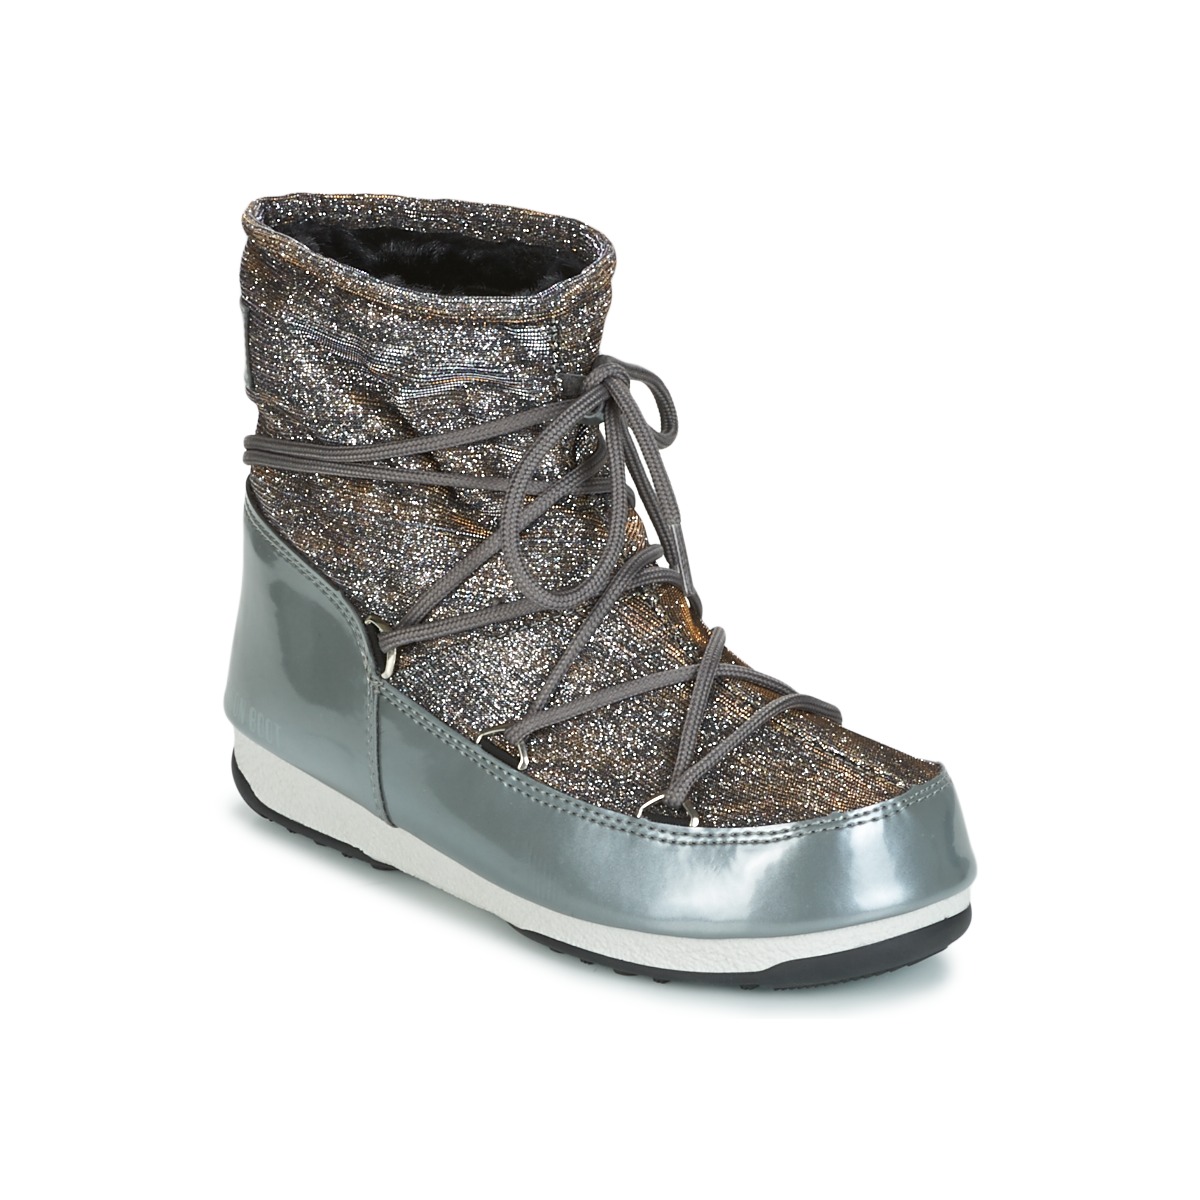 Shoes Women Snow boots Moon Boot MOON BOOT LOW LUREX Grey / Silver